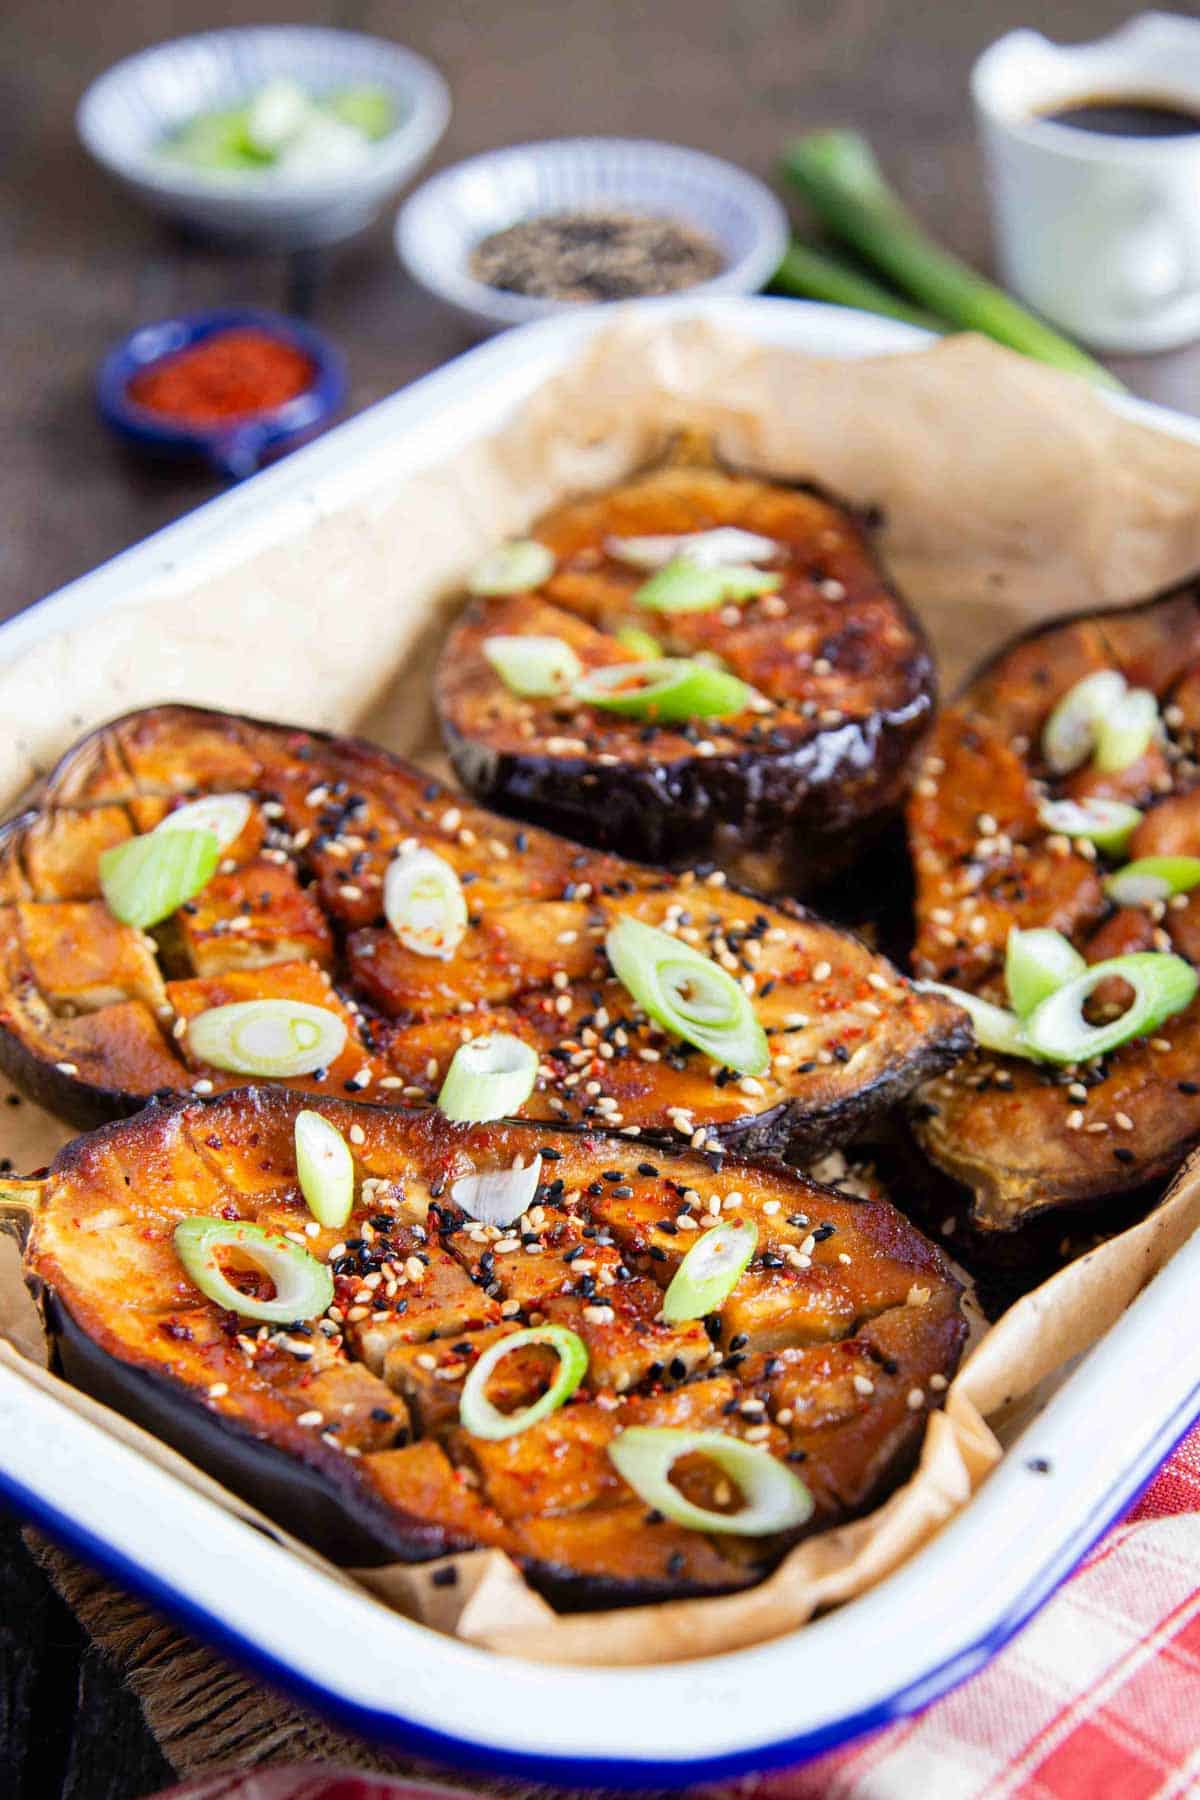 miso aubergines shining with a rich caramelized glaze.